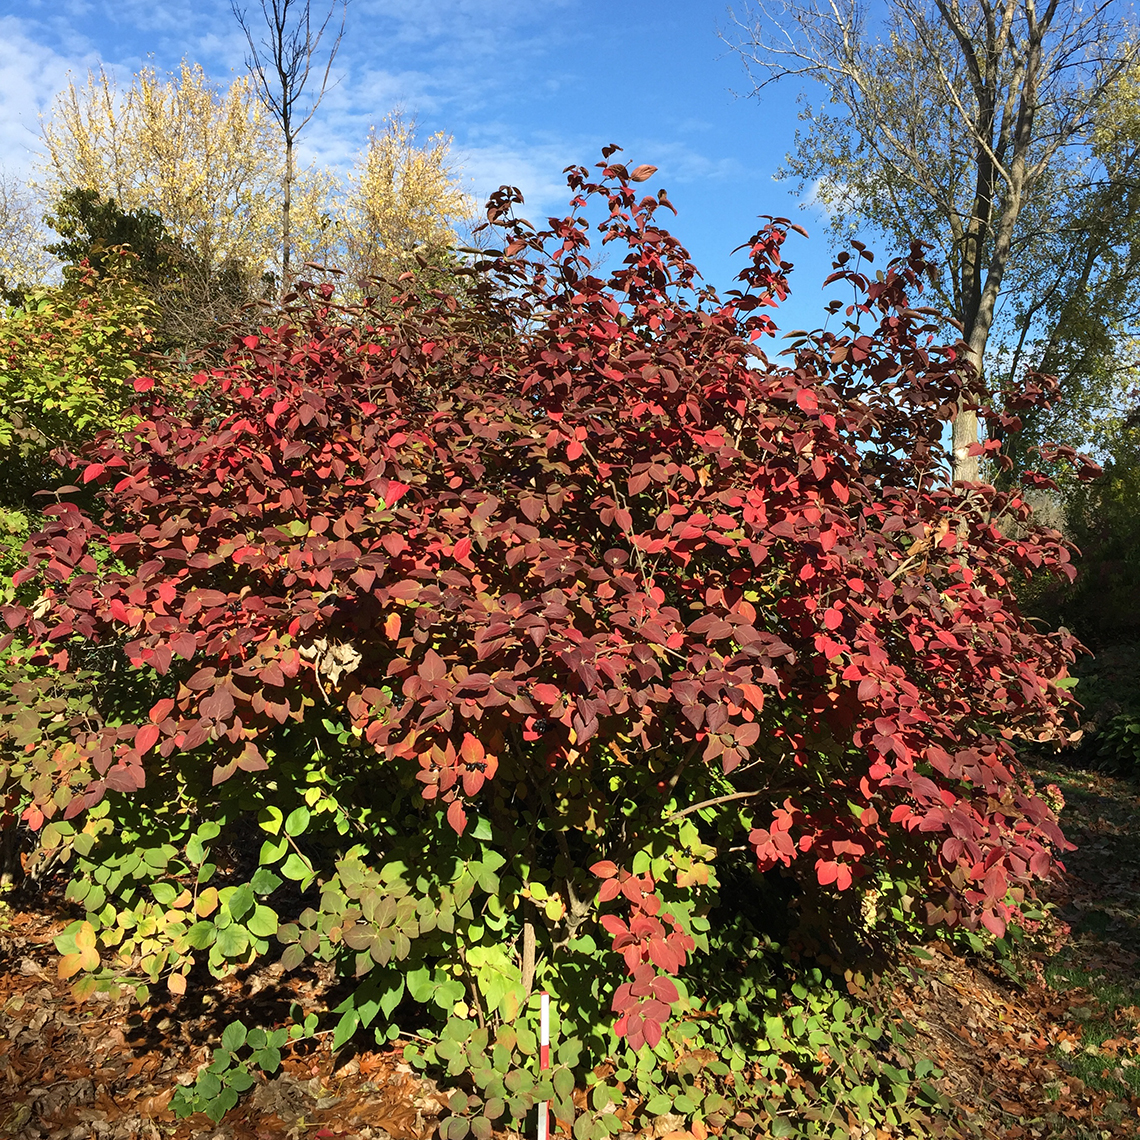 Spice Girl Koreanspice viburnum showing its bright red fall foliage against a brilliant blue autumn sky